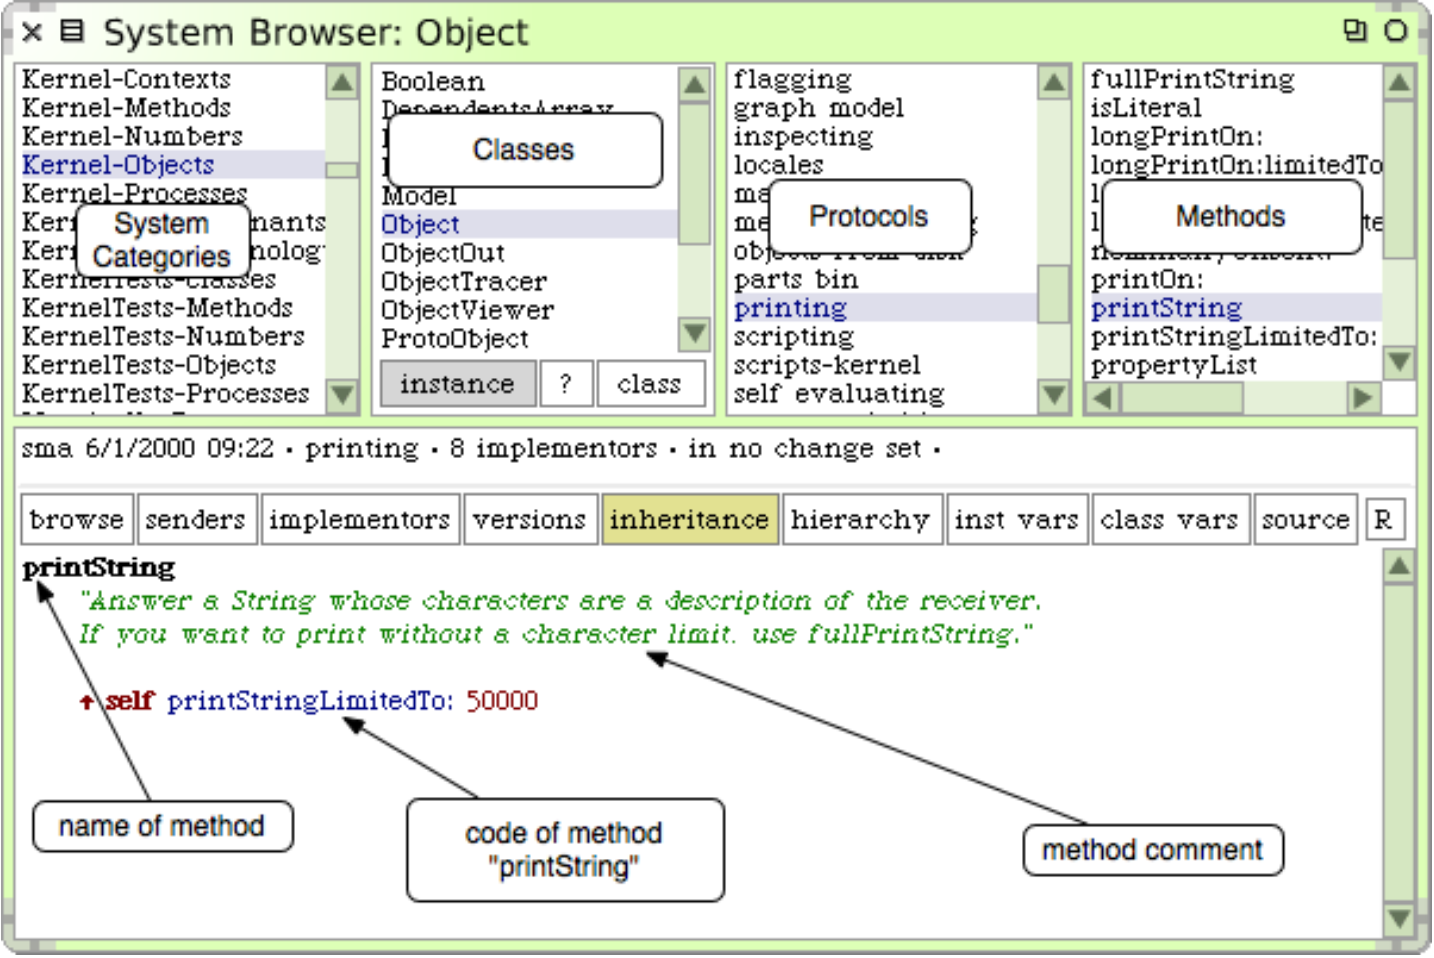 The system browser showing the printString method of class object.